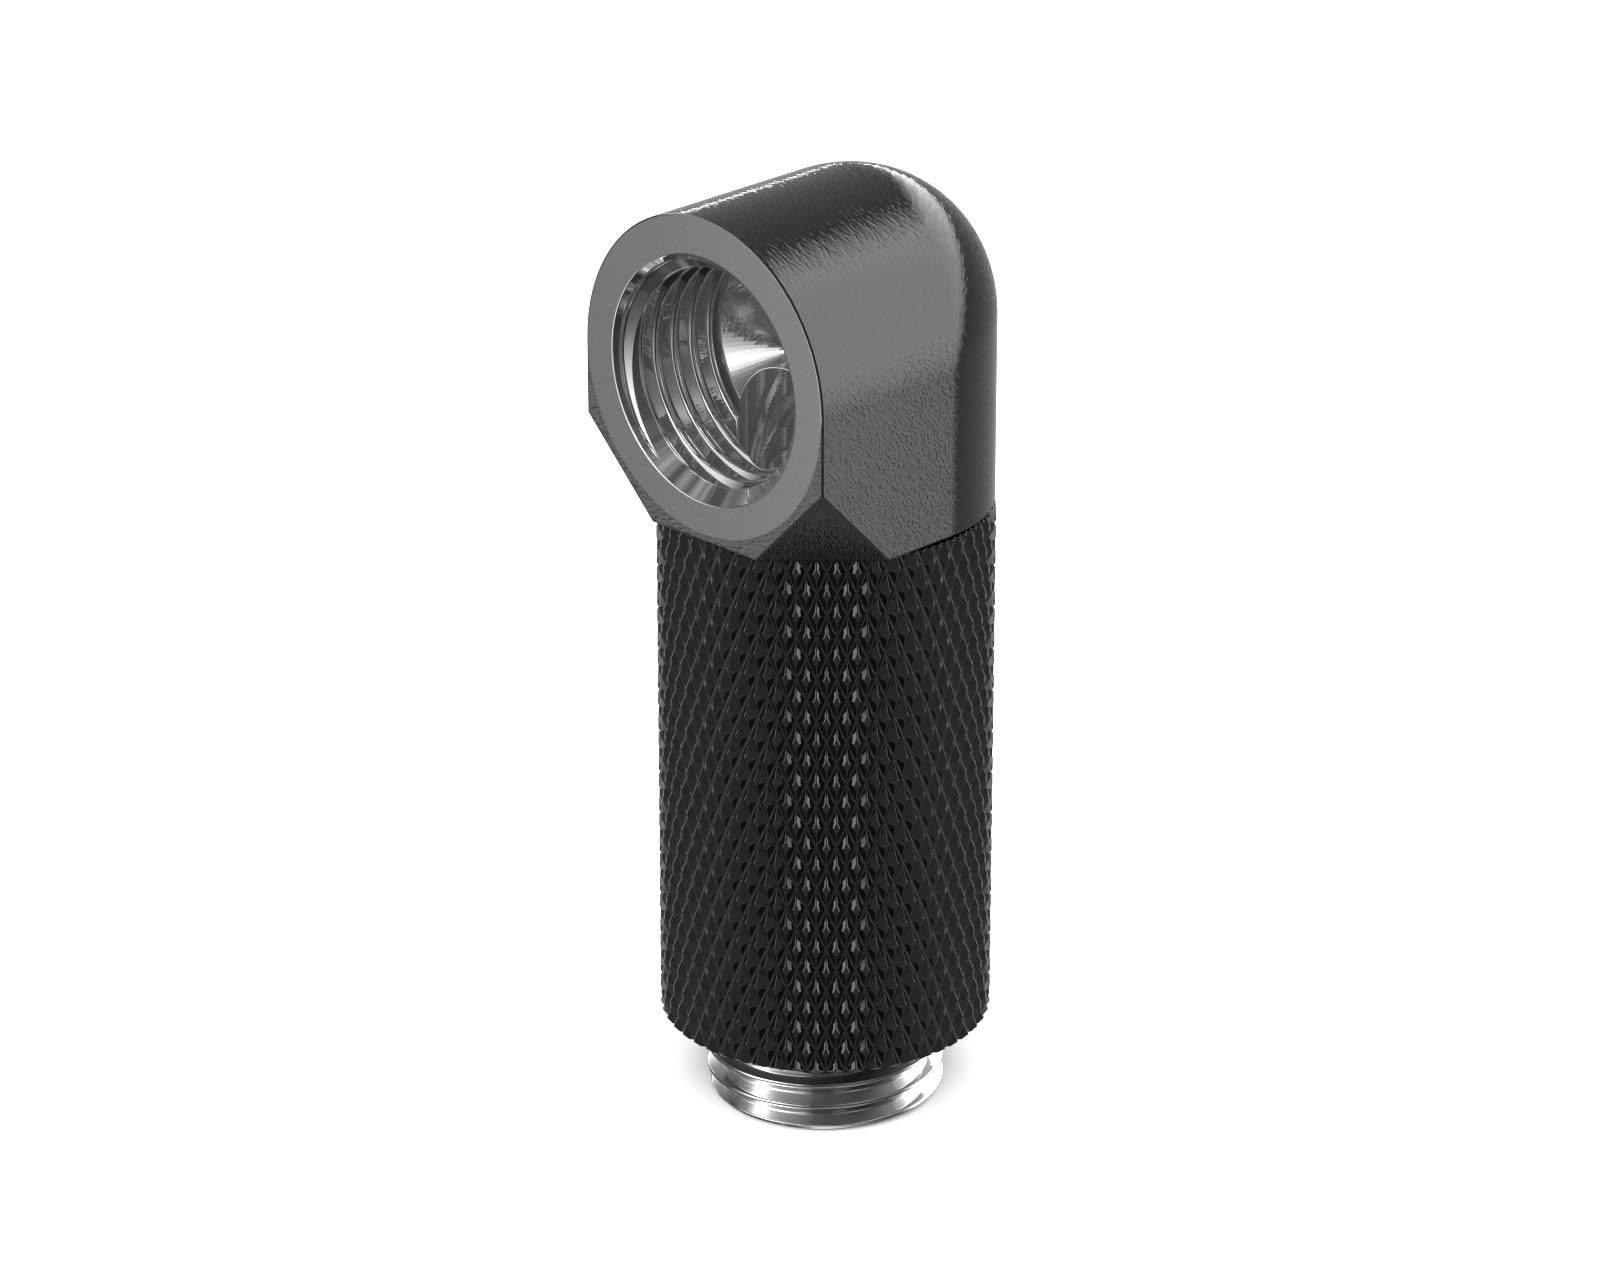 PrimoChill Male to Female G 1/4in. 90 Degree SX Rotary 30mm Extension Elbow Fitting - PrimoChill - KEEPING IT COOL Satin Black